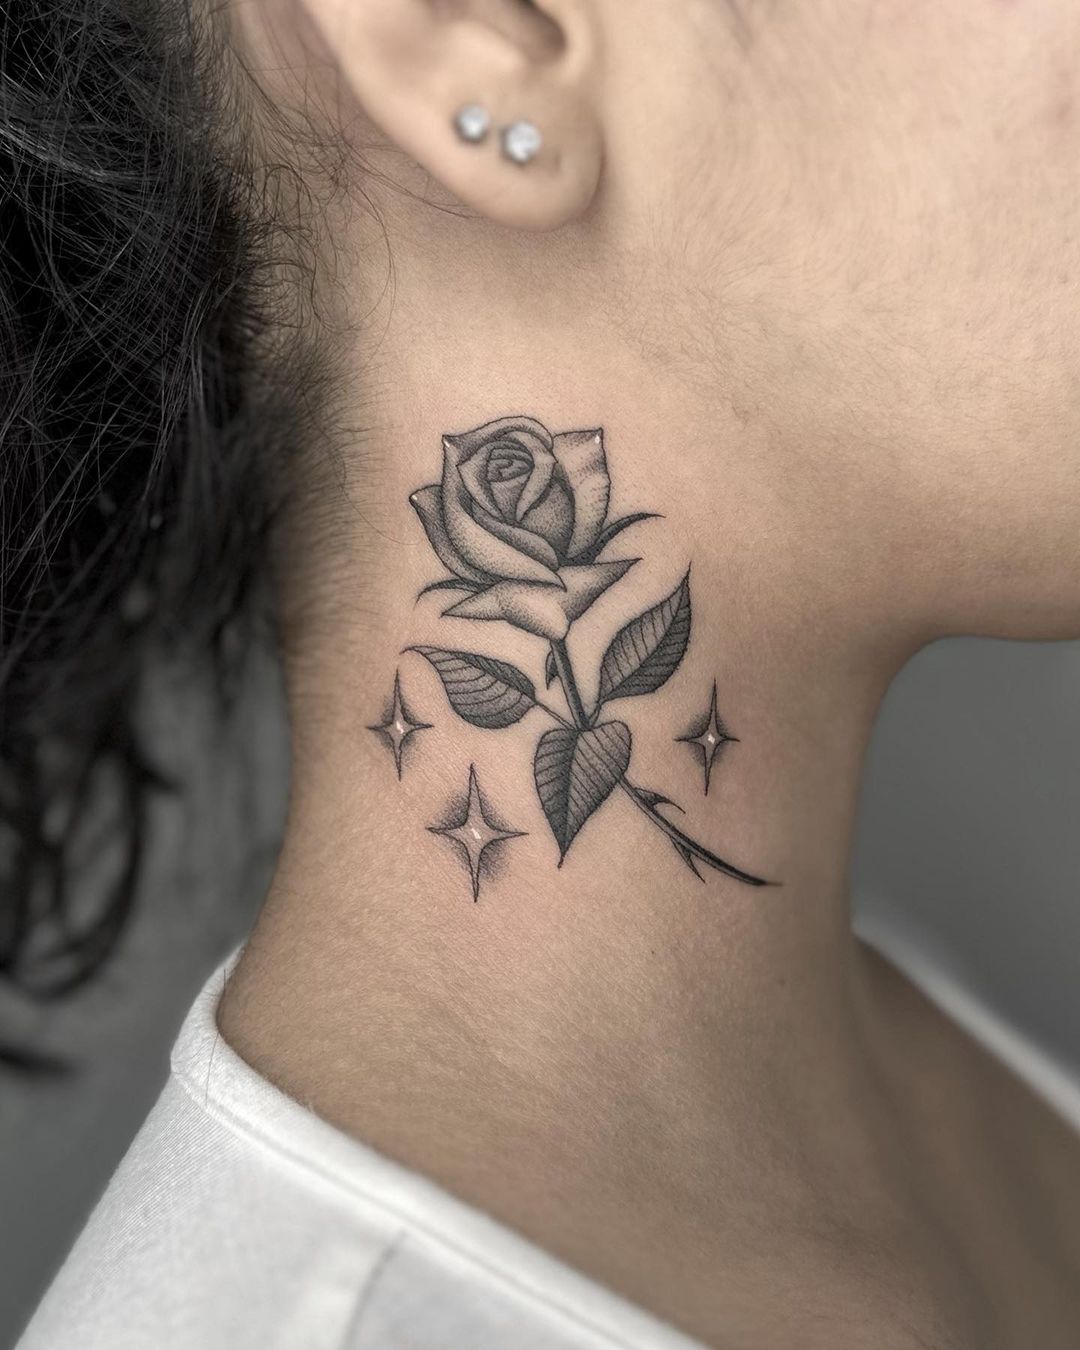 Neck Rose Tattoo With Stars